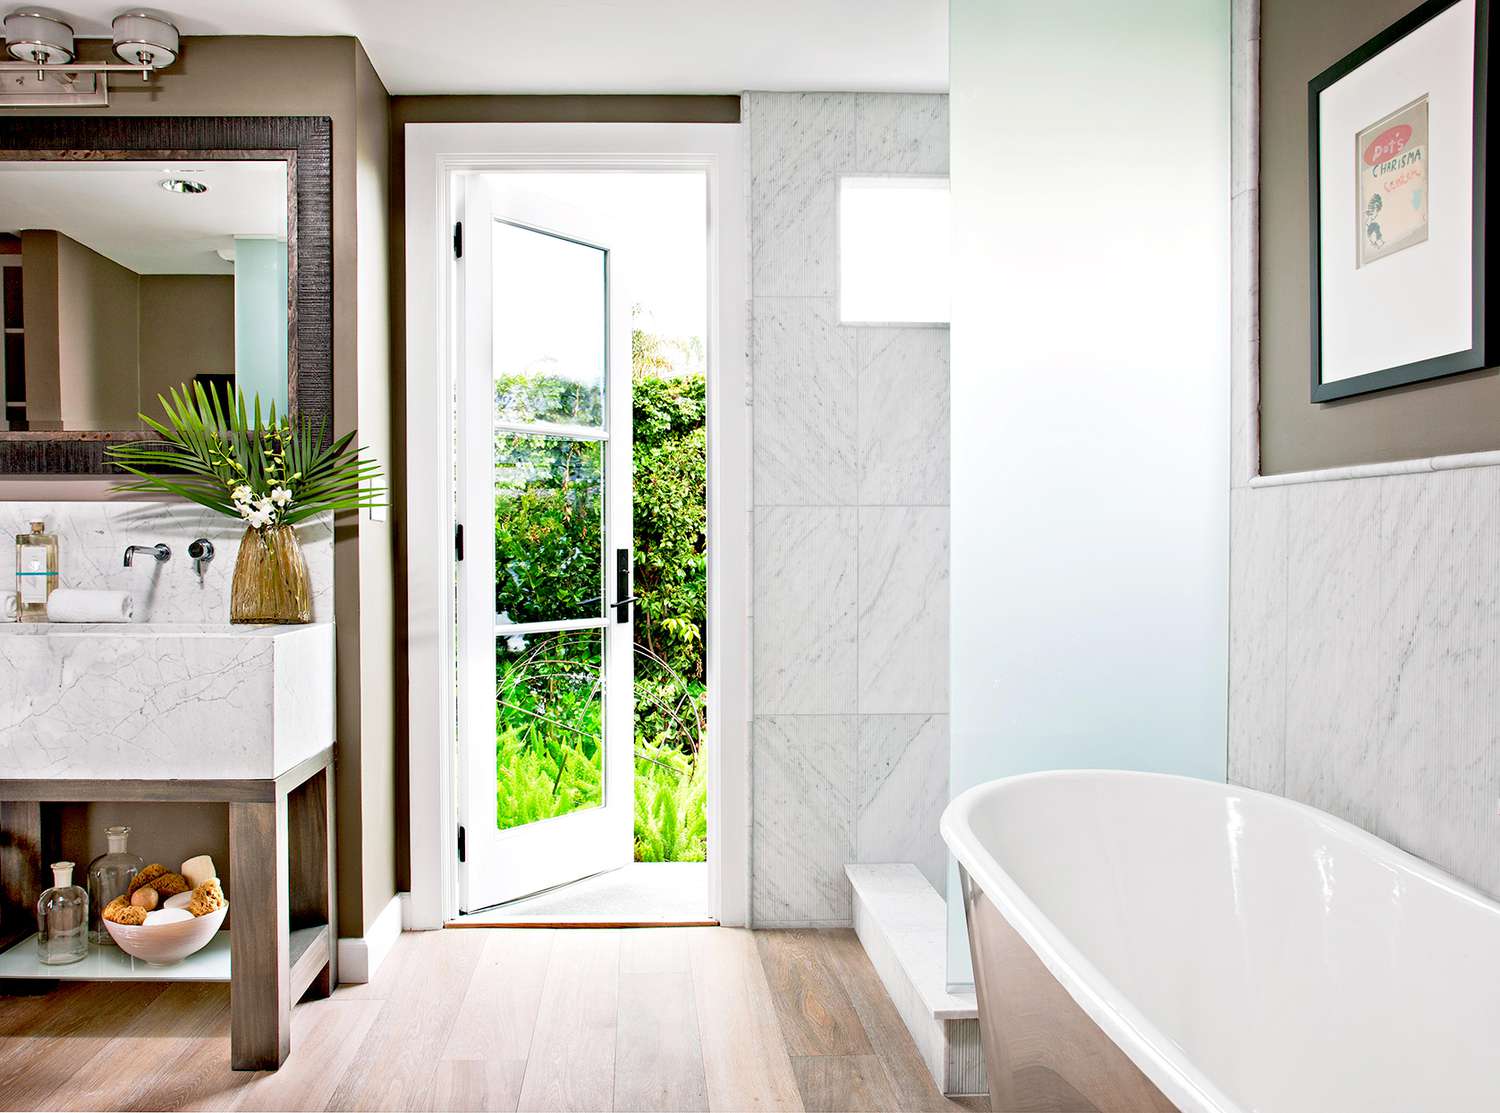 Accent Walls Are In The 8 Best Bathroom Trends To Try In 2020 Better Homes Gardens,How To Make Thai Tea Boba